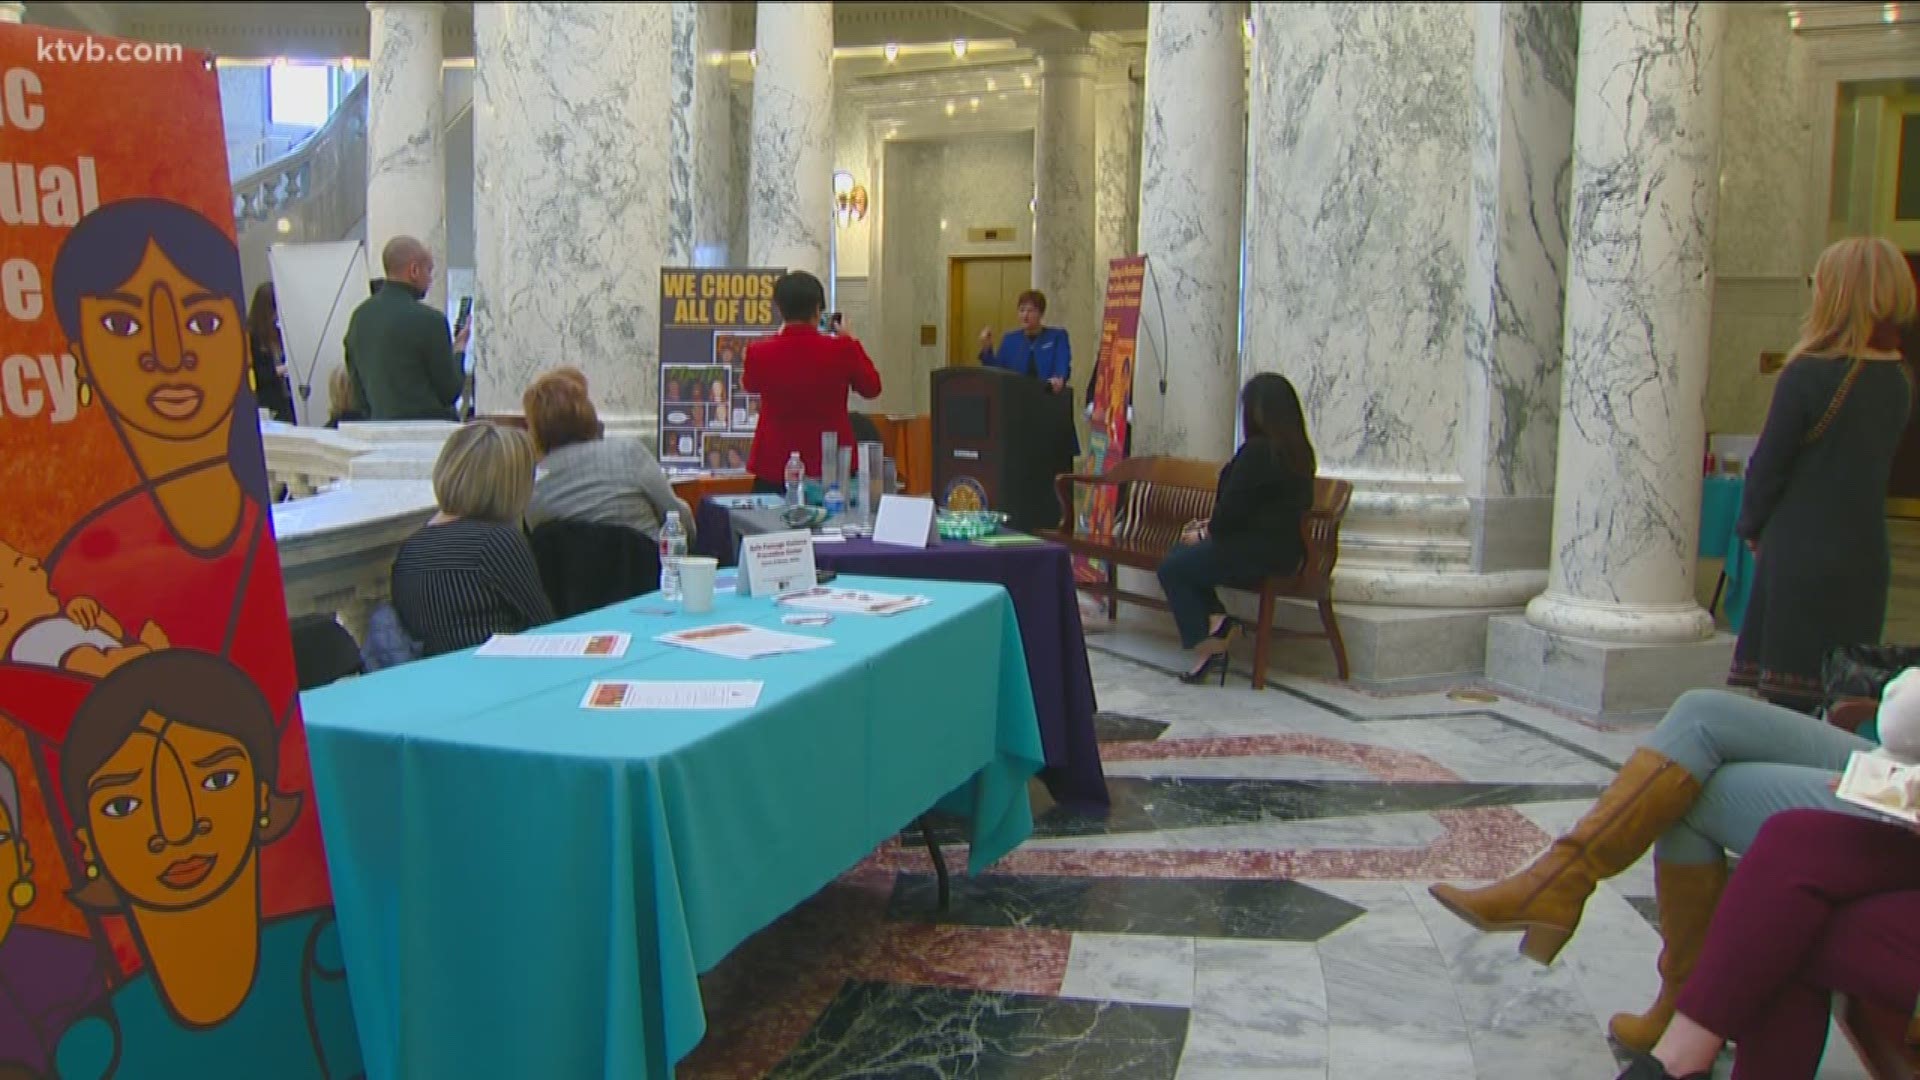 Rep. Melissa Wintrow of Boise was at the Capitol Rotunda to discuss a Child and Safety Bill that would enforce stricter marriage laws and hopes to reintroduce a bill that would keep firearms out of the hands of domestic abusers.